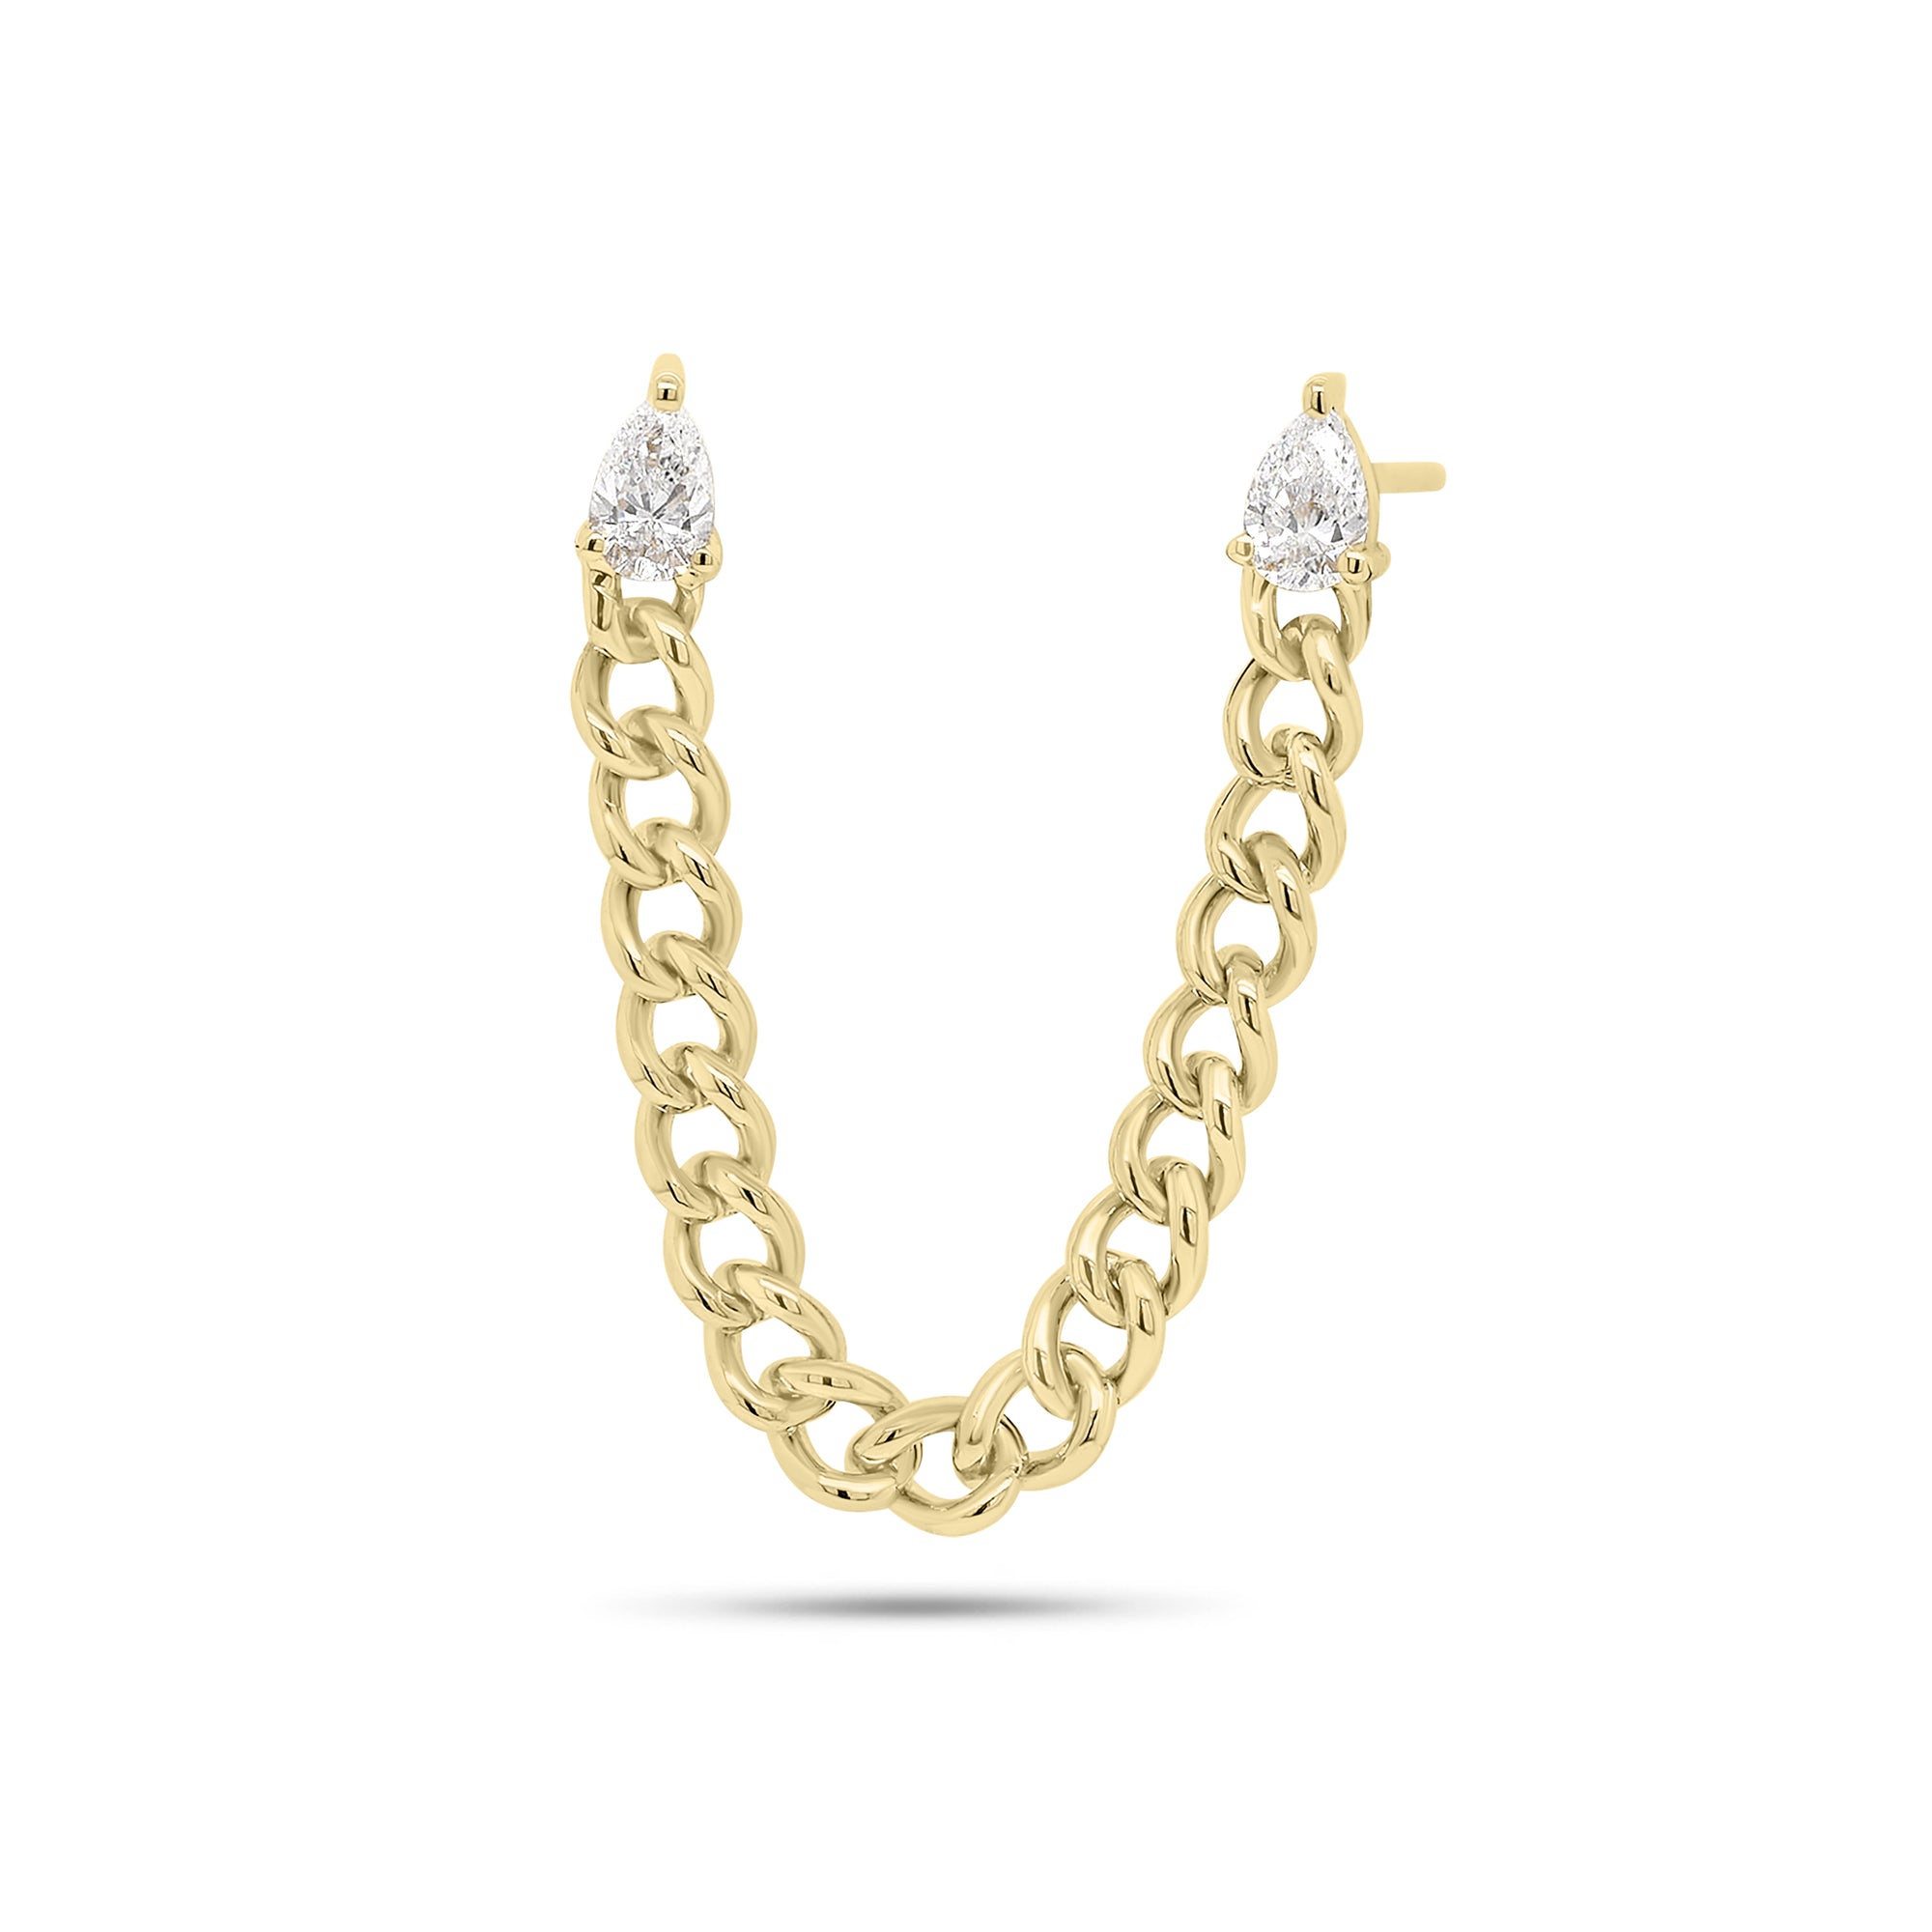 Pear-Shaped Diamond Double Piercing Chain Earring - 14K gold weighing 1.81 grams  - 2 pear-shaped diamonds weighing 0.20 carats